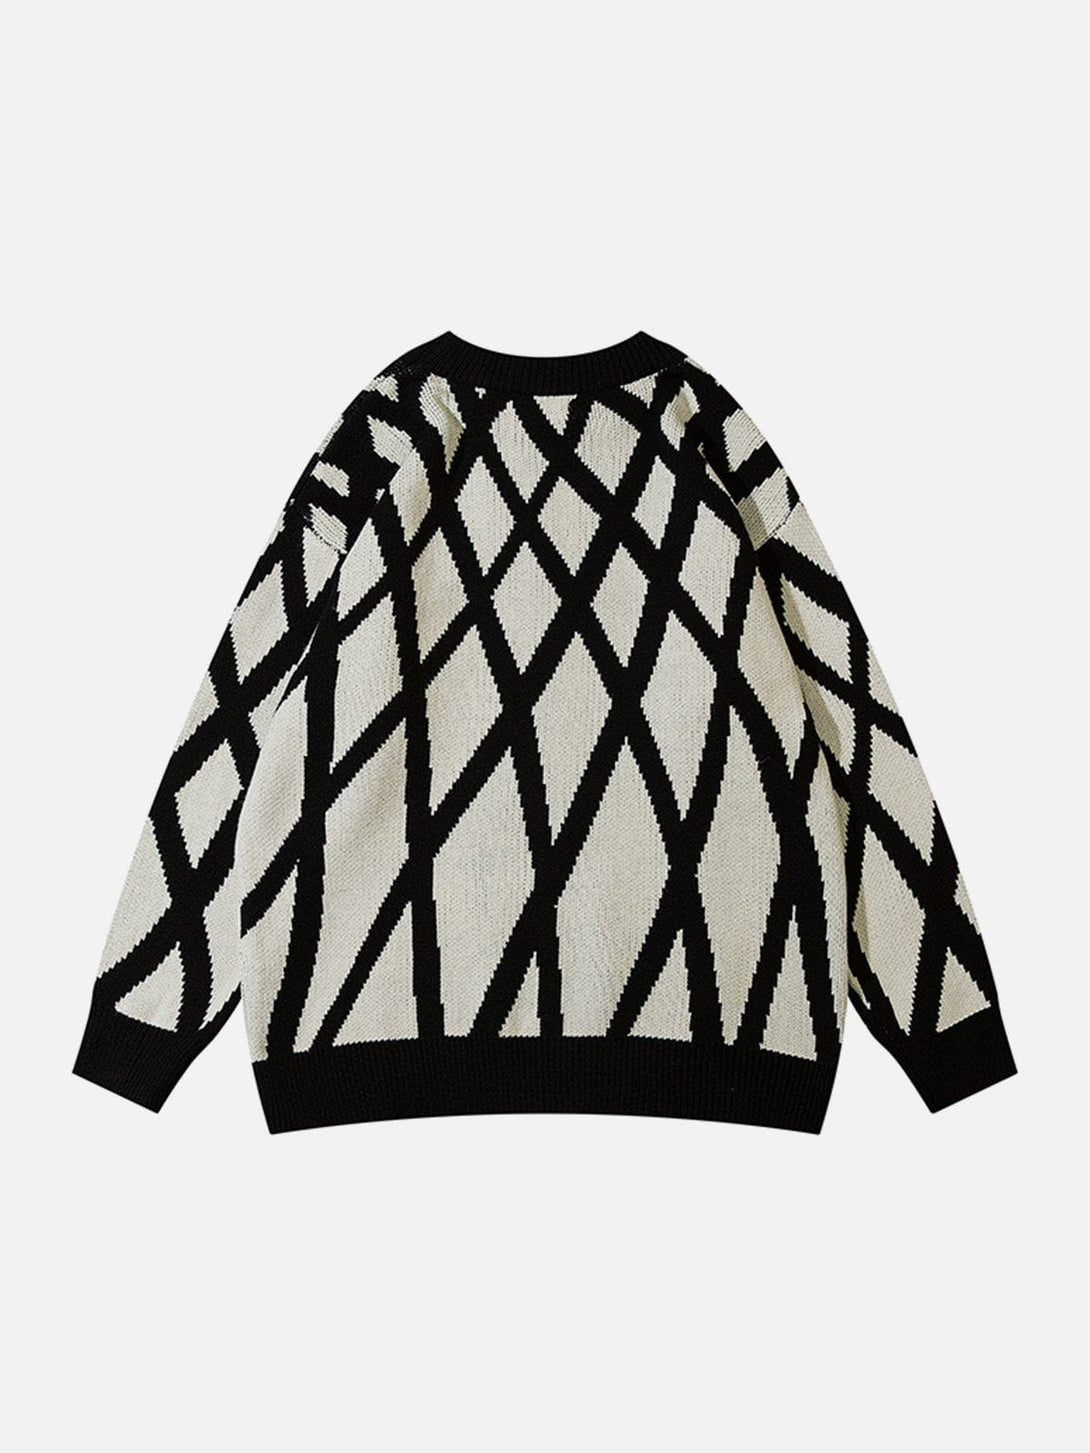 Levefly - Crossover Mesh Jacquard Knit Sweater - Streetwear Fashion - levefly.com